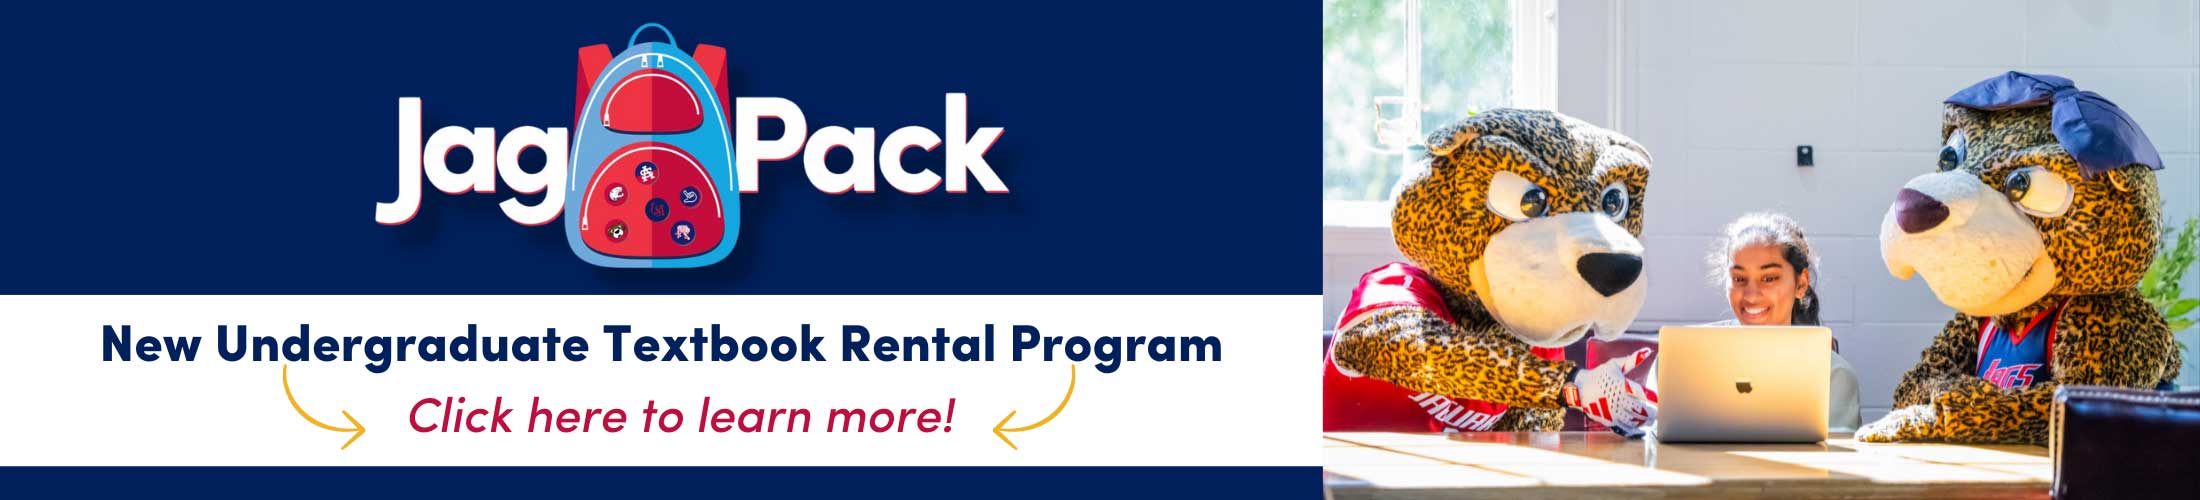 JagPack New Undergraduate Textbook Rental Program Click here to learn more